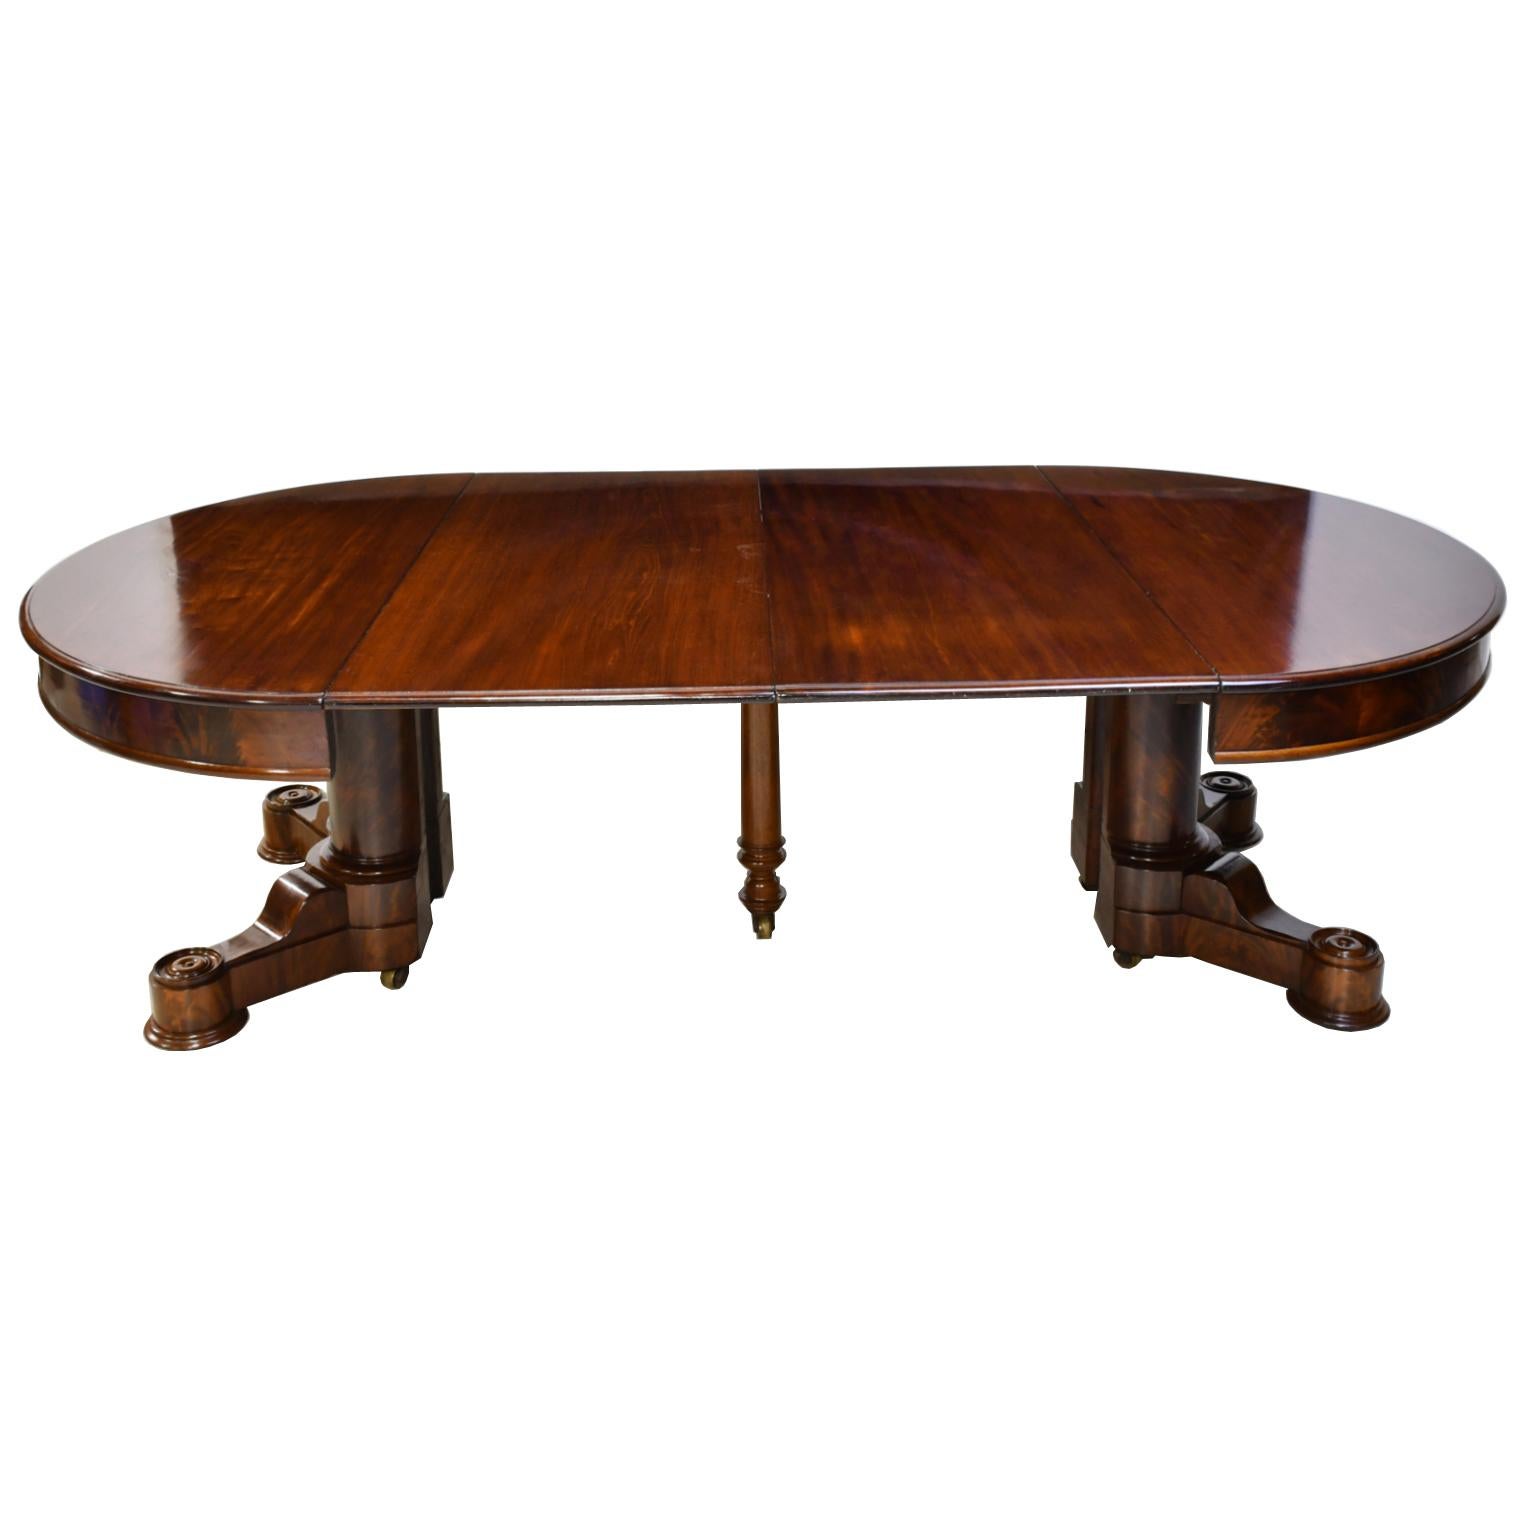 American Empire Oval Extension Dining Table in Mahogany with Pedestal Base 4